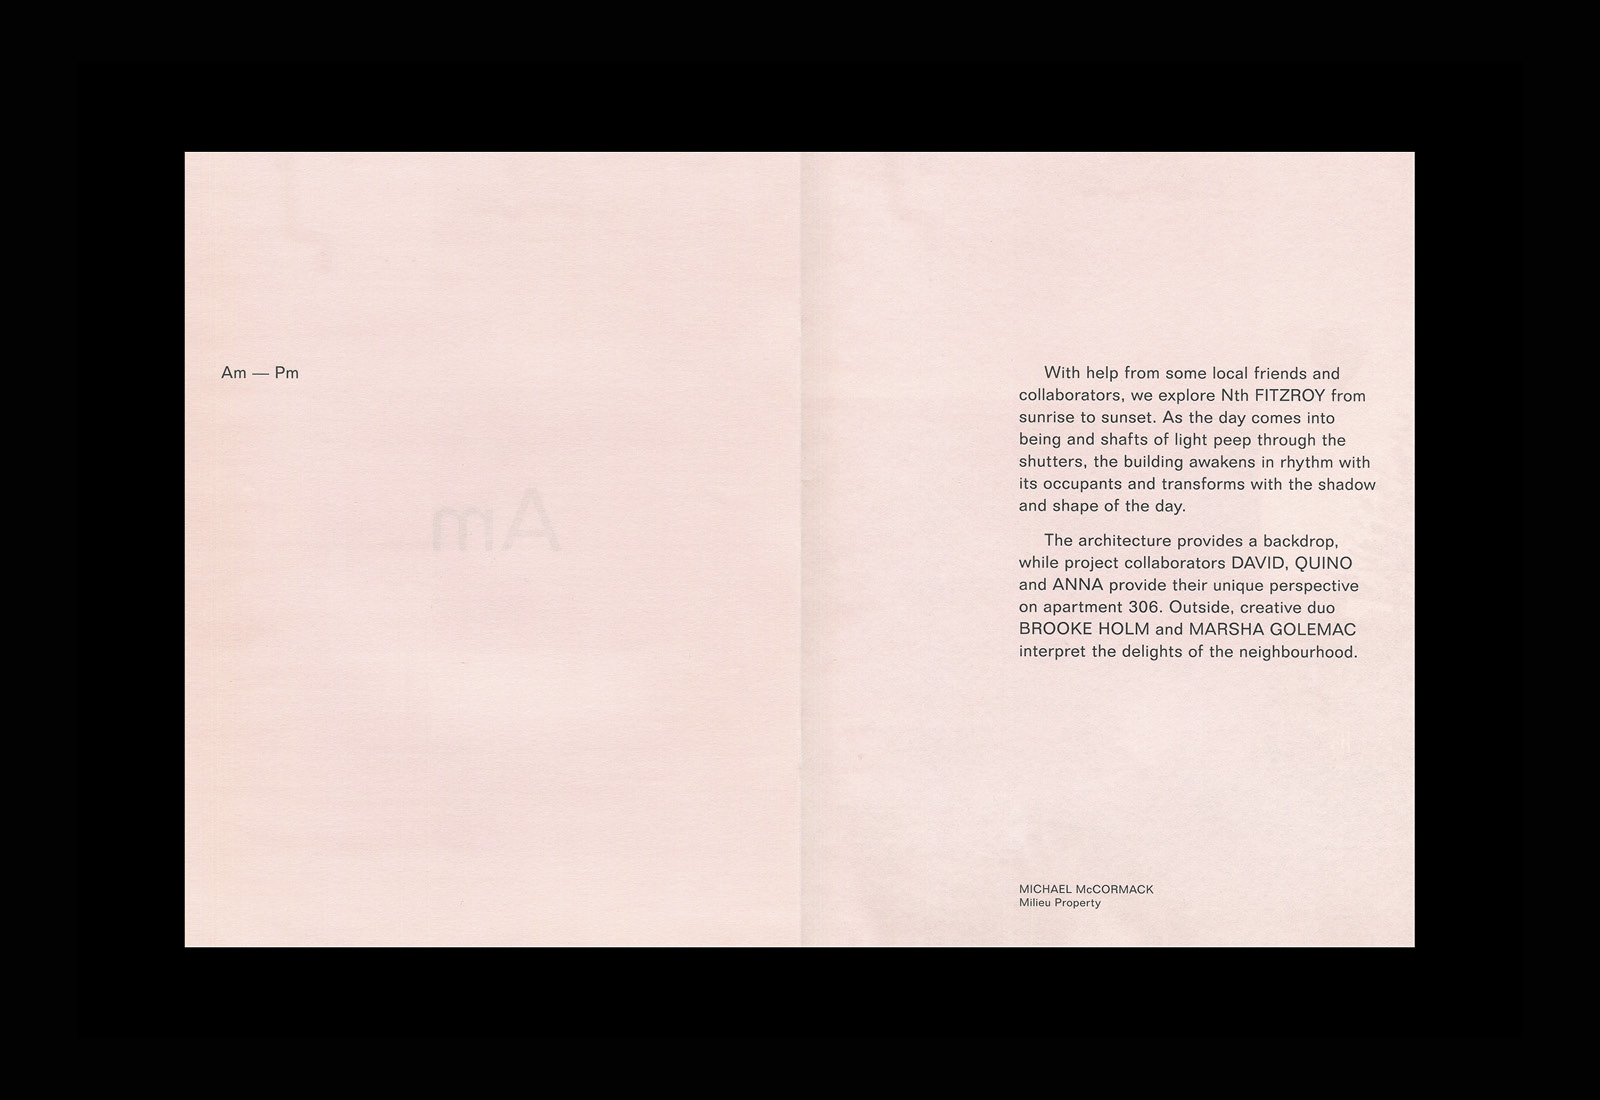 AM/PM, a brochure designed by Studio Hi Ho for residential development Nth Fitzroy